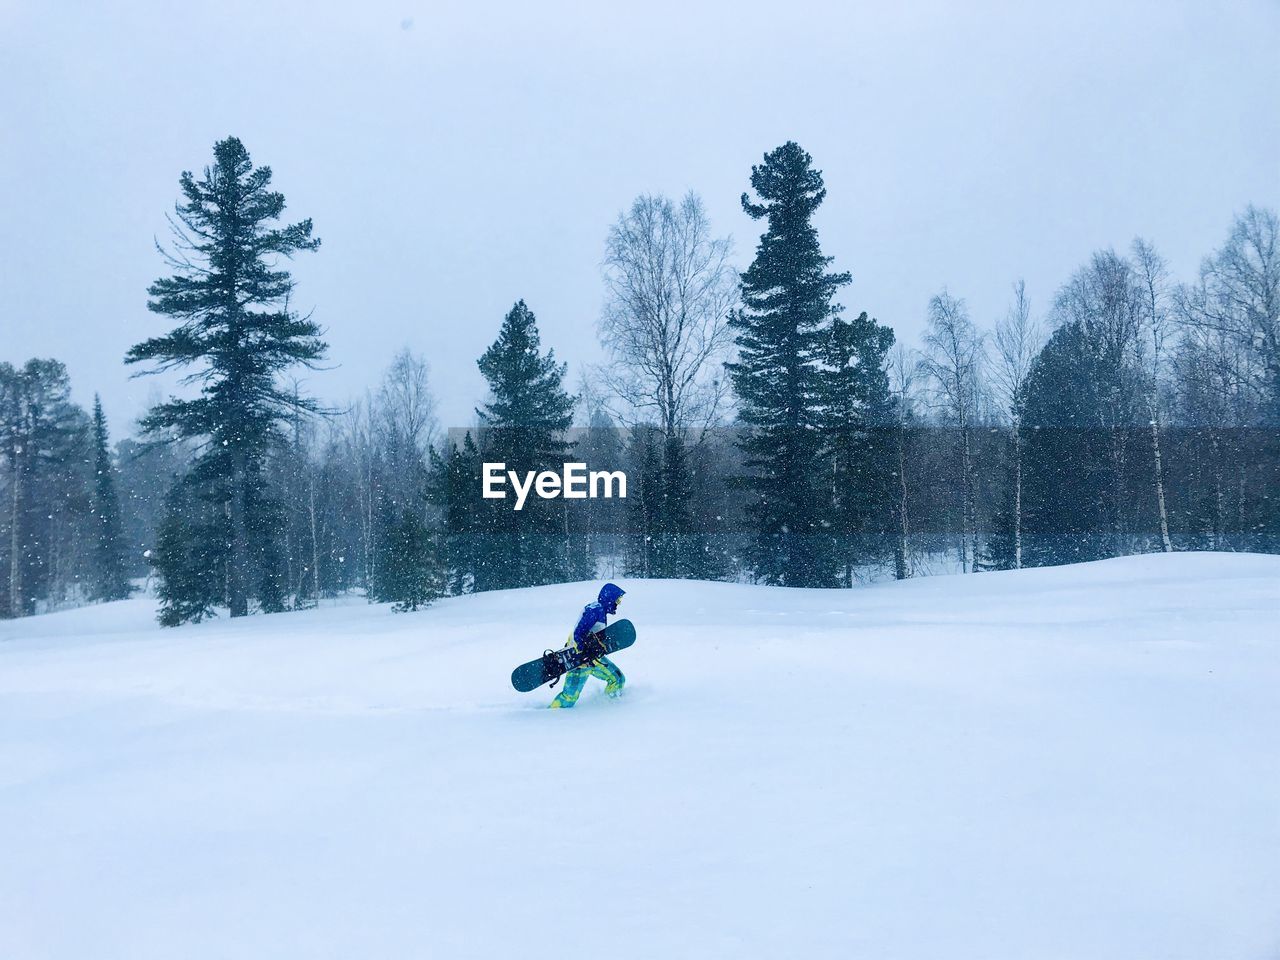 Man with a snowboard in the woods